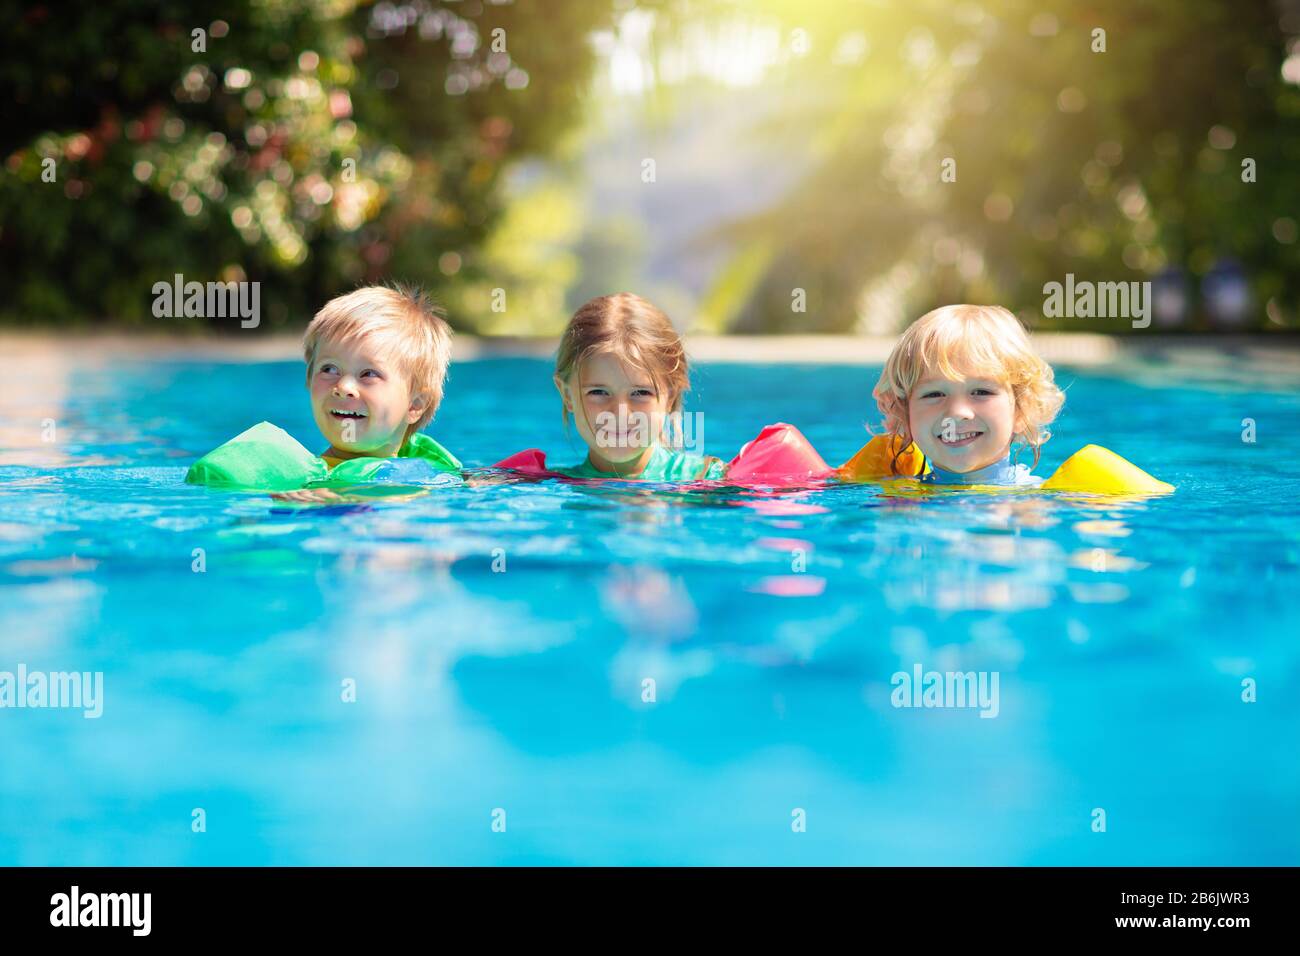 Kids play in outdoor swimming pool of tropical resort. Swim aid for young child. Baby learning to dive. Group of children playing in water. Colorful l Stock Photo